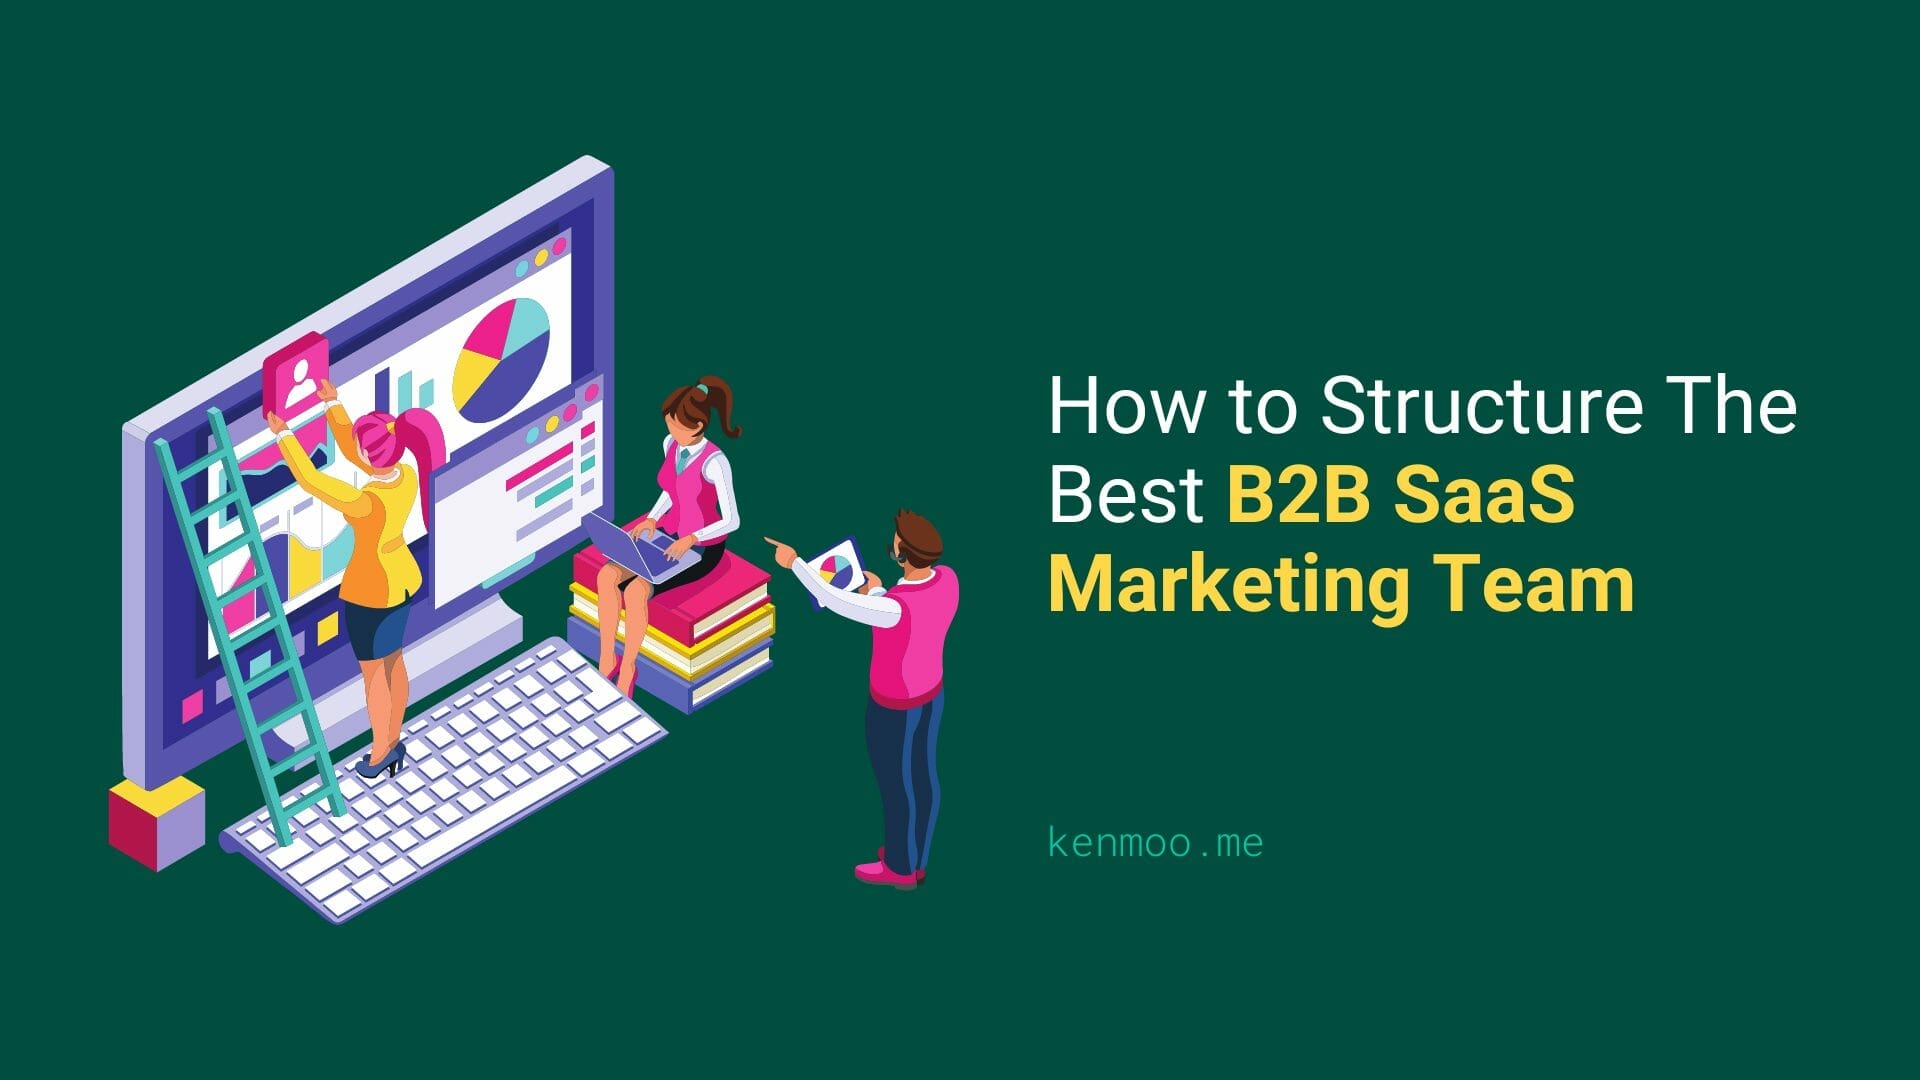 How to Structure The Best B2B SaaS Marketing Team